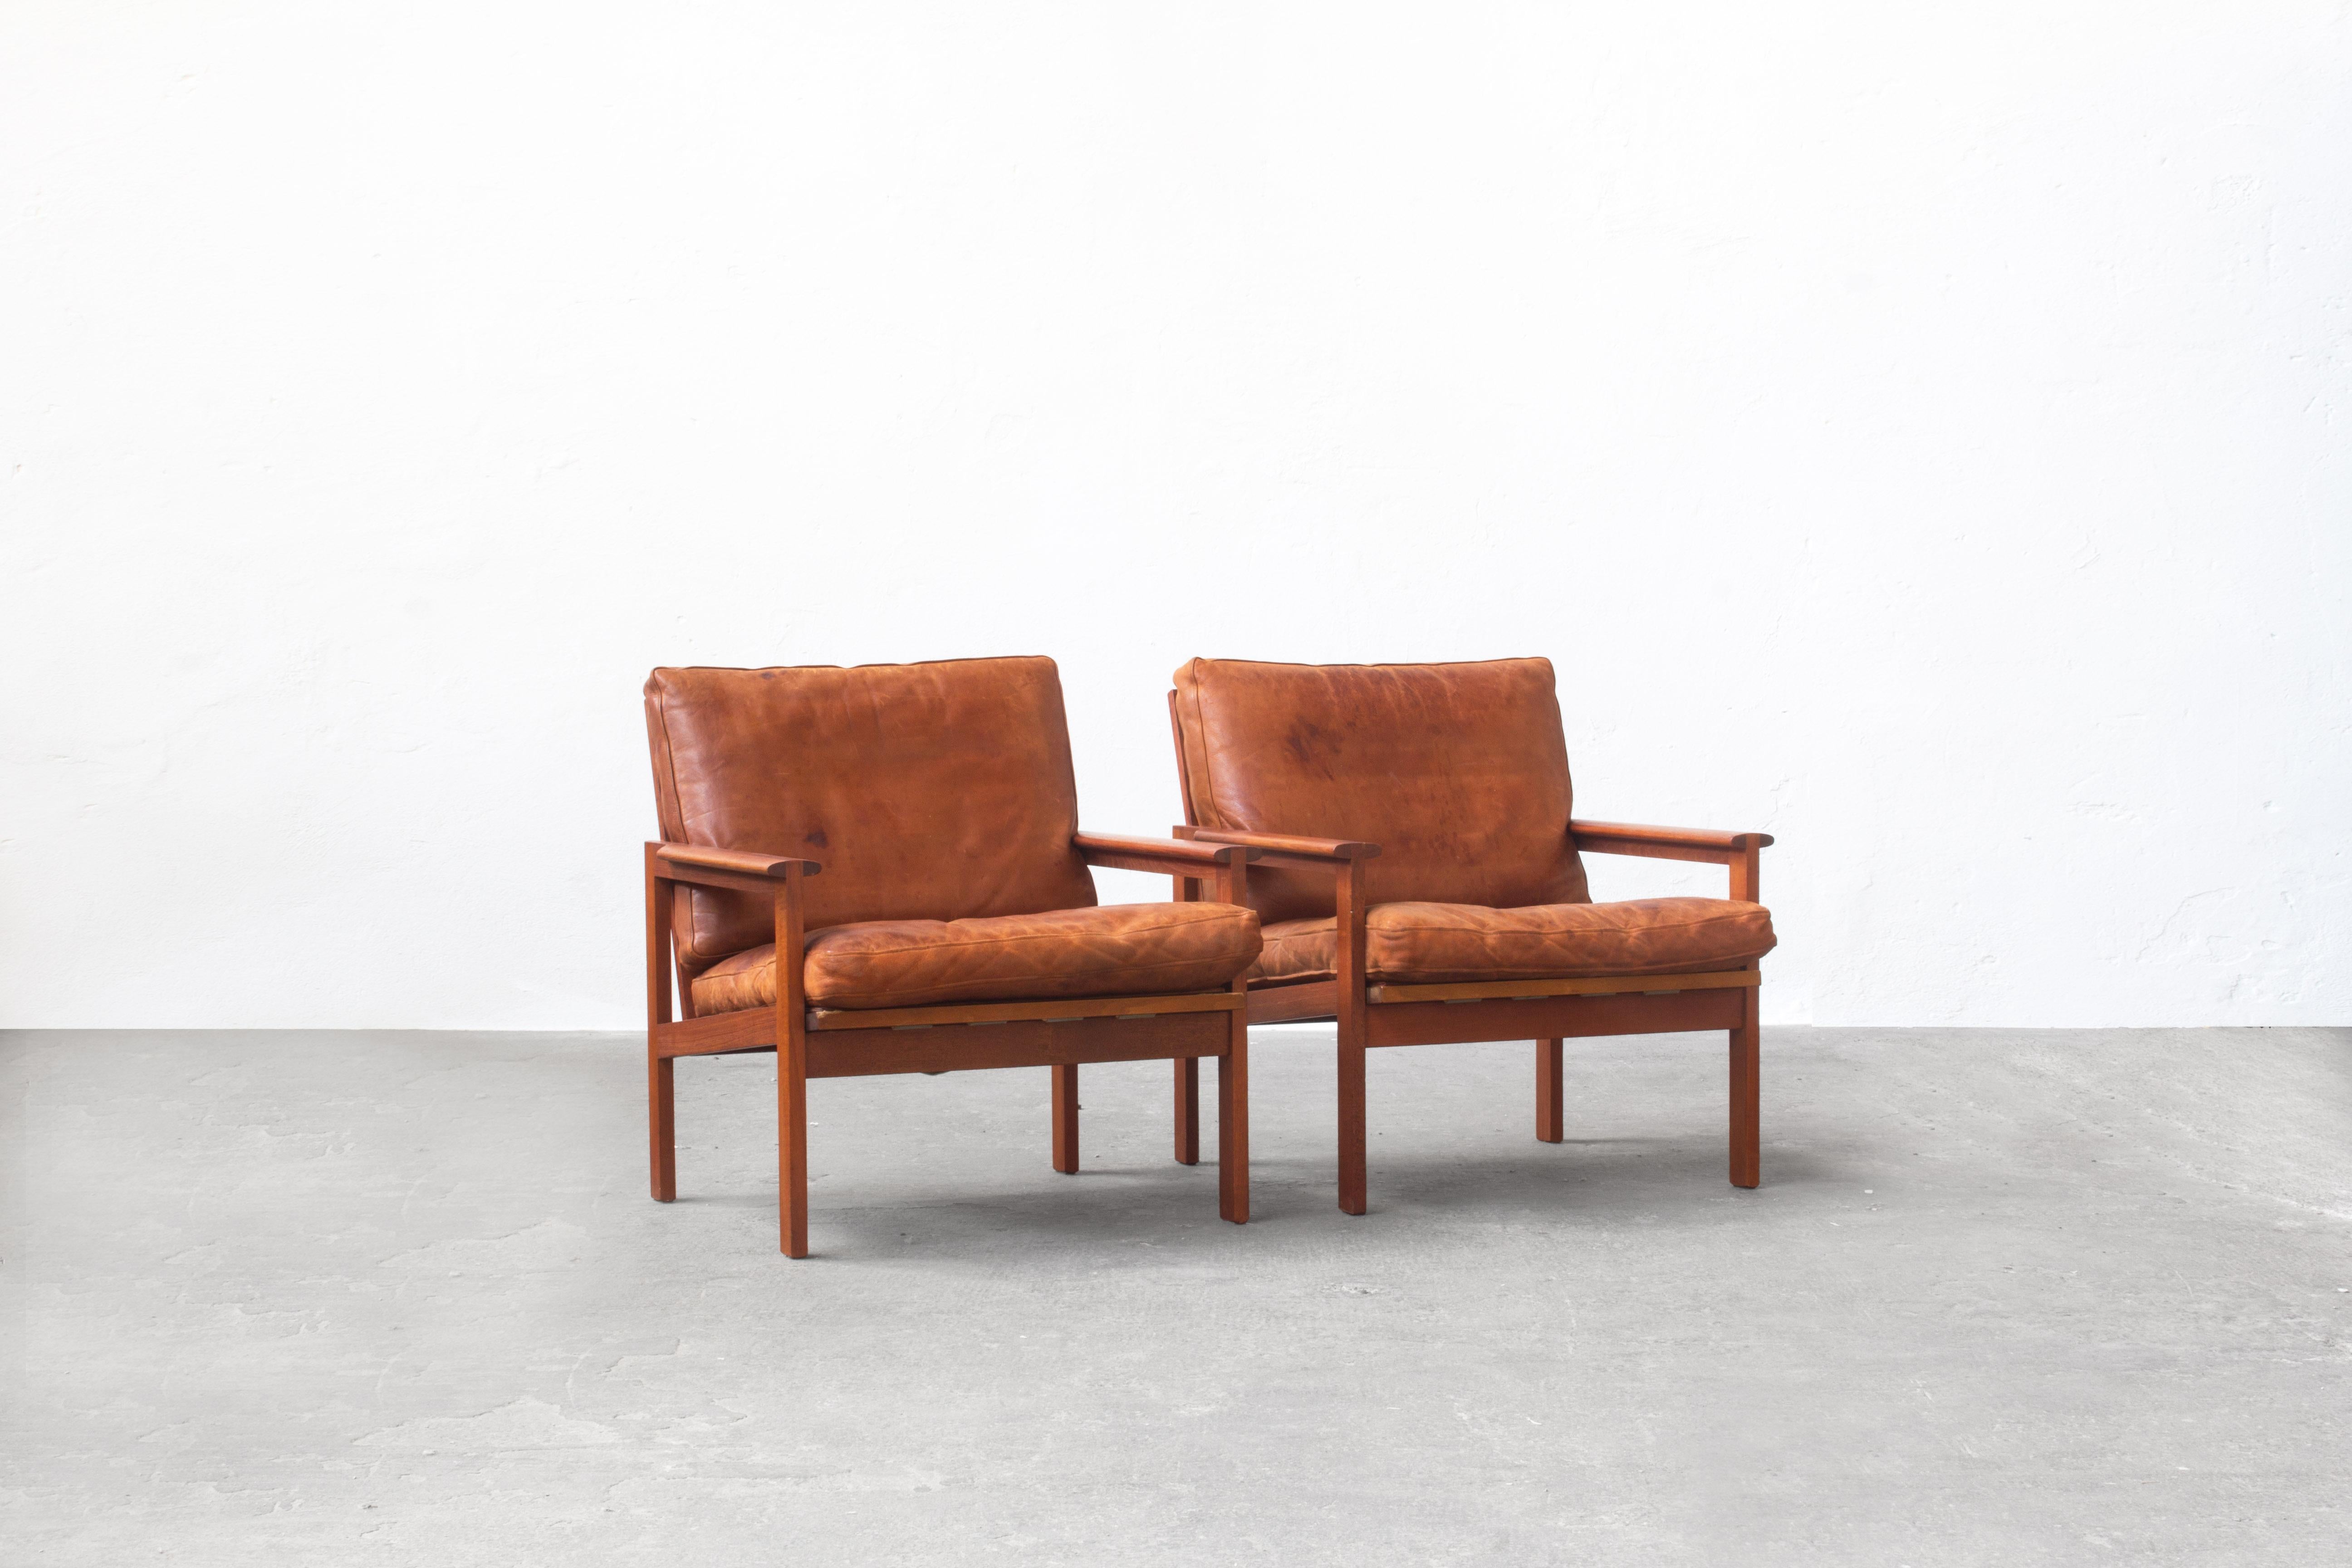 Very beautiful pair of lounge chairs designed by Illum Wikkelsø for Niels Eilersen.
Both lounge chairs come with brown-cognac leather and teak wood. The condition of both is in a good vintage condition.
 